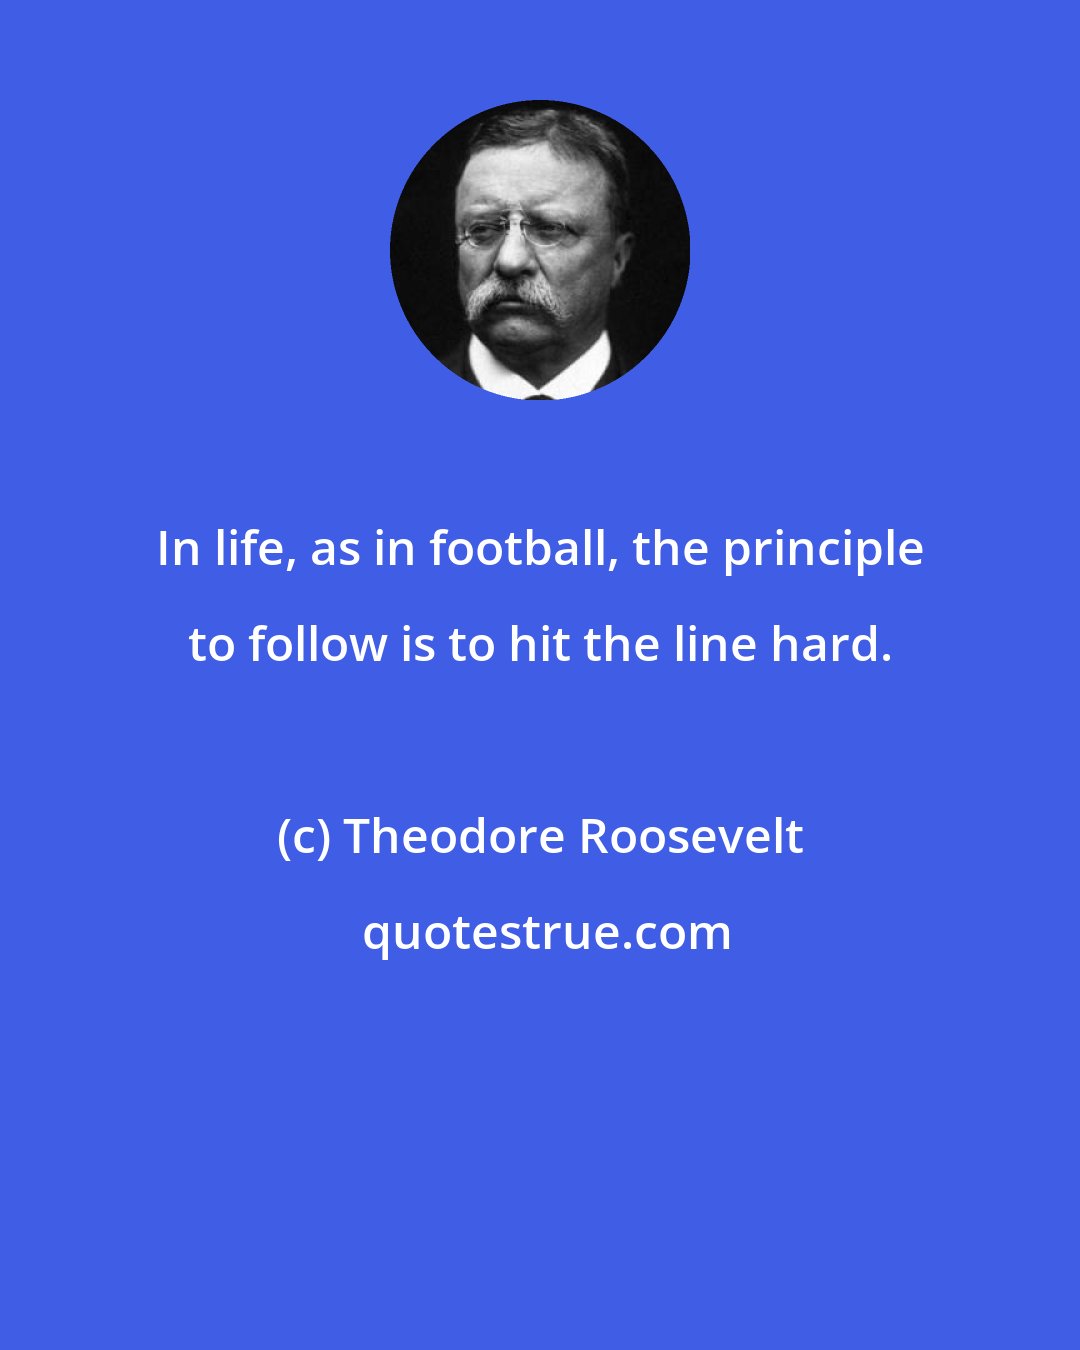 Theodore Roosevelt: In life, as in football, the principle to follow is to hit the line hard.